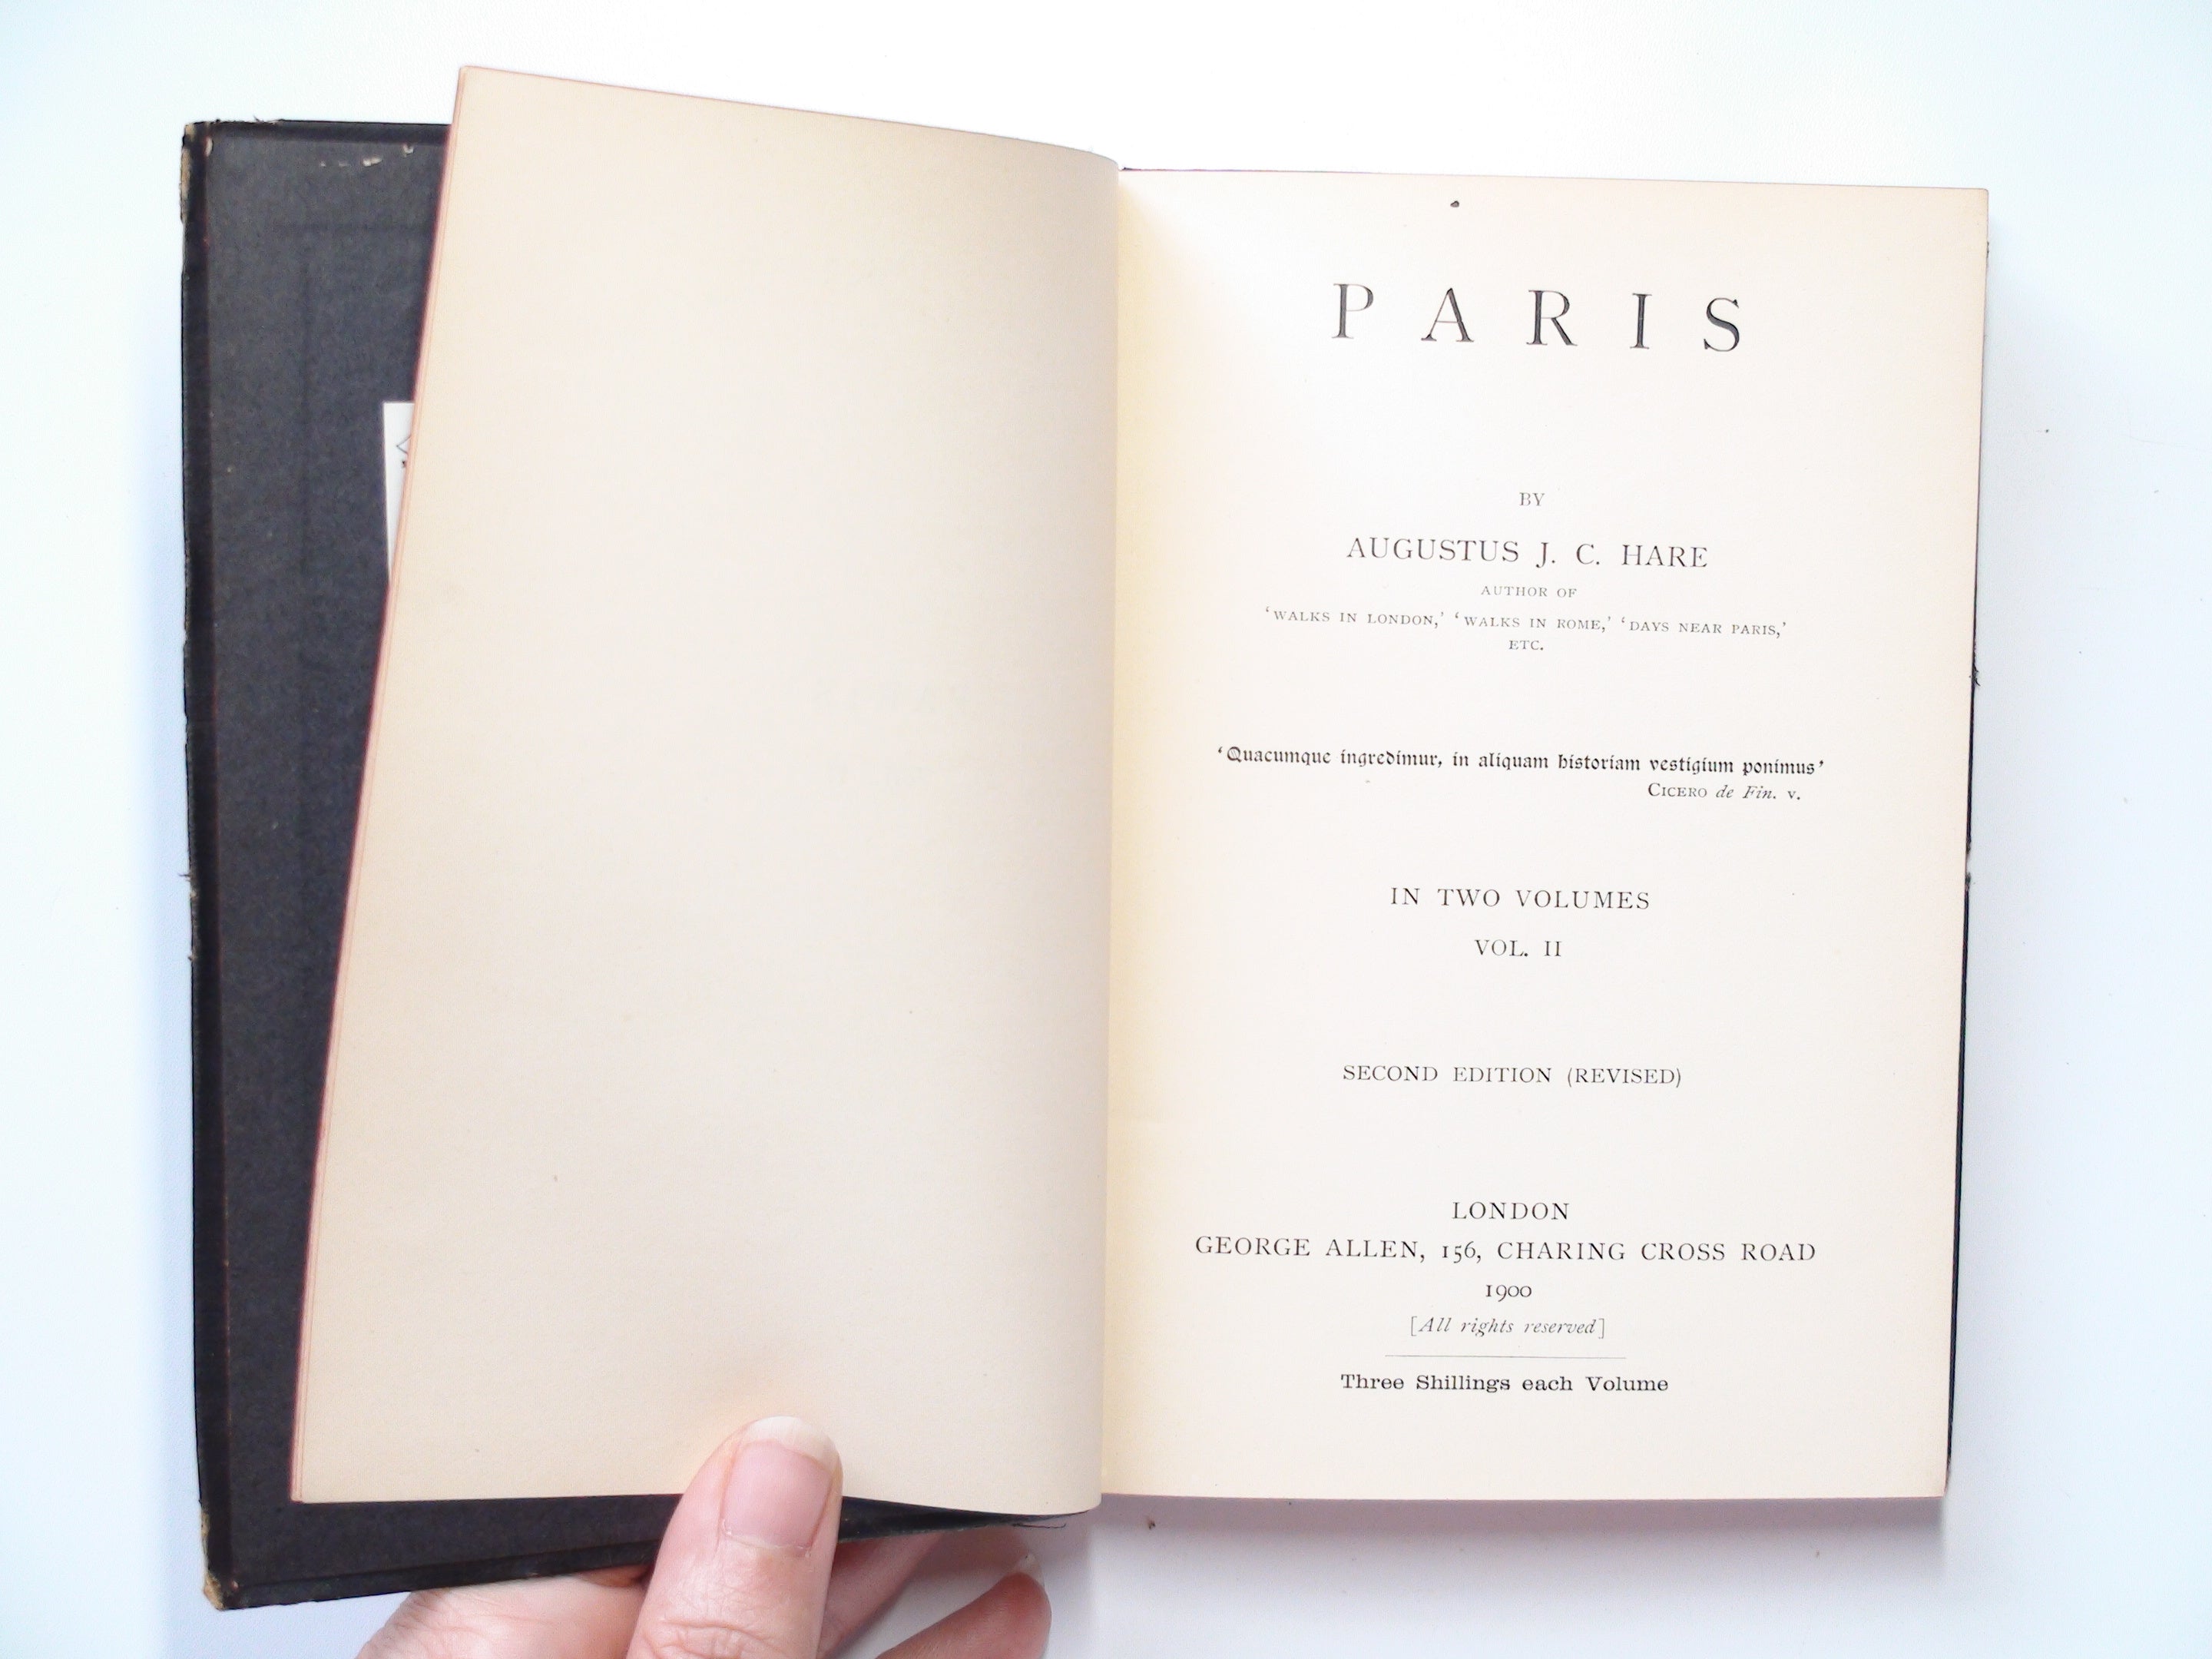 Paris, by Augustus J. C. Hare, In Two Vols, 2nd Ed. Rev., Illustrated, 1900